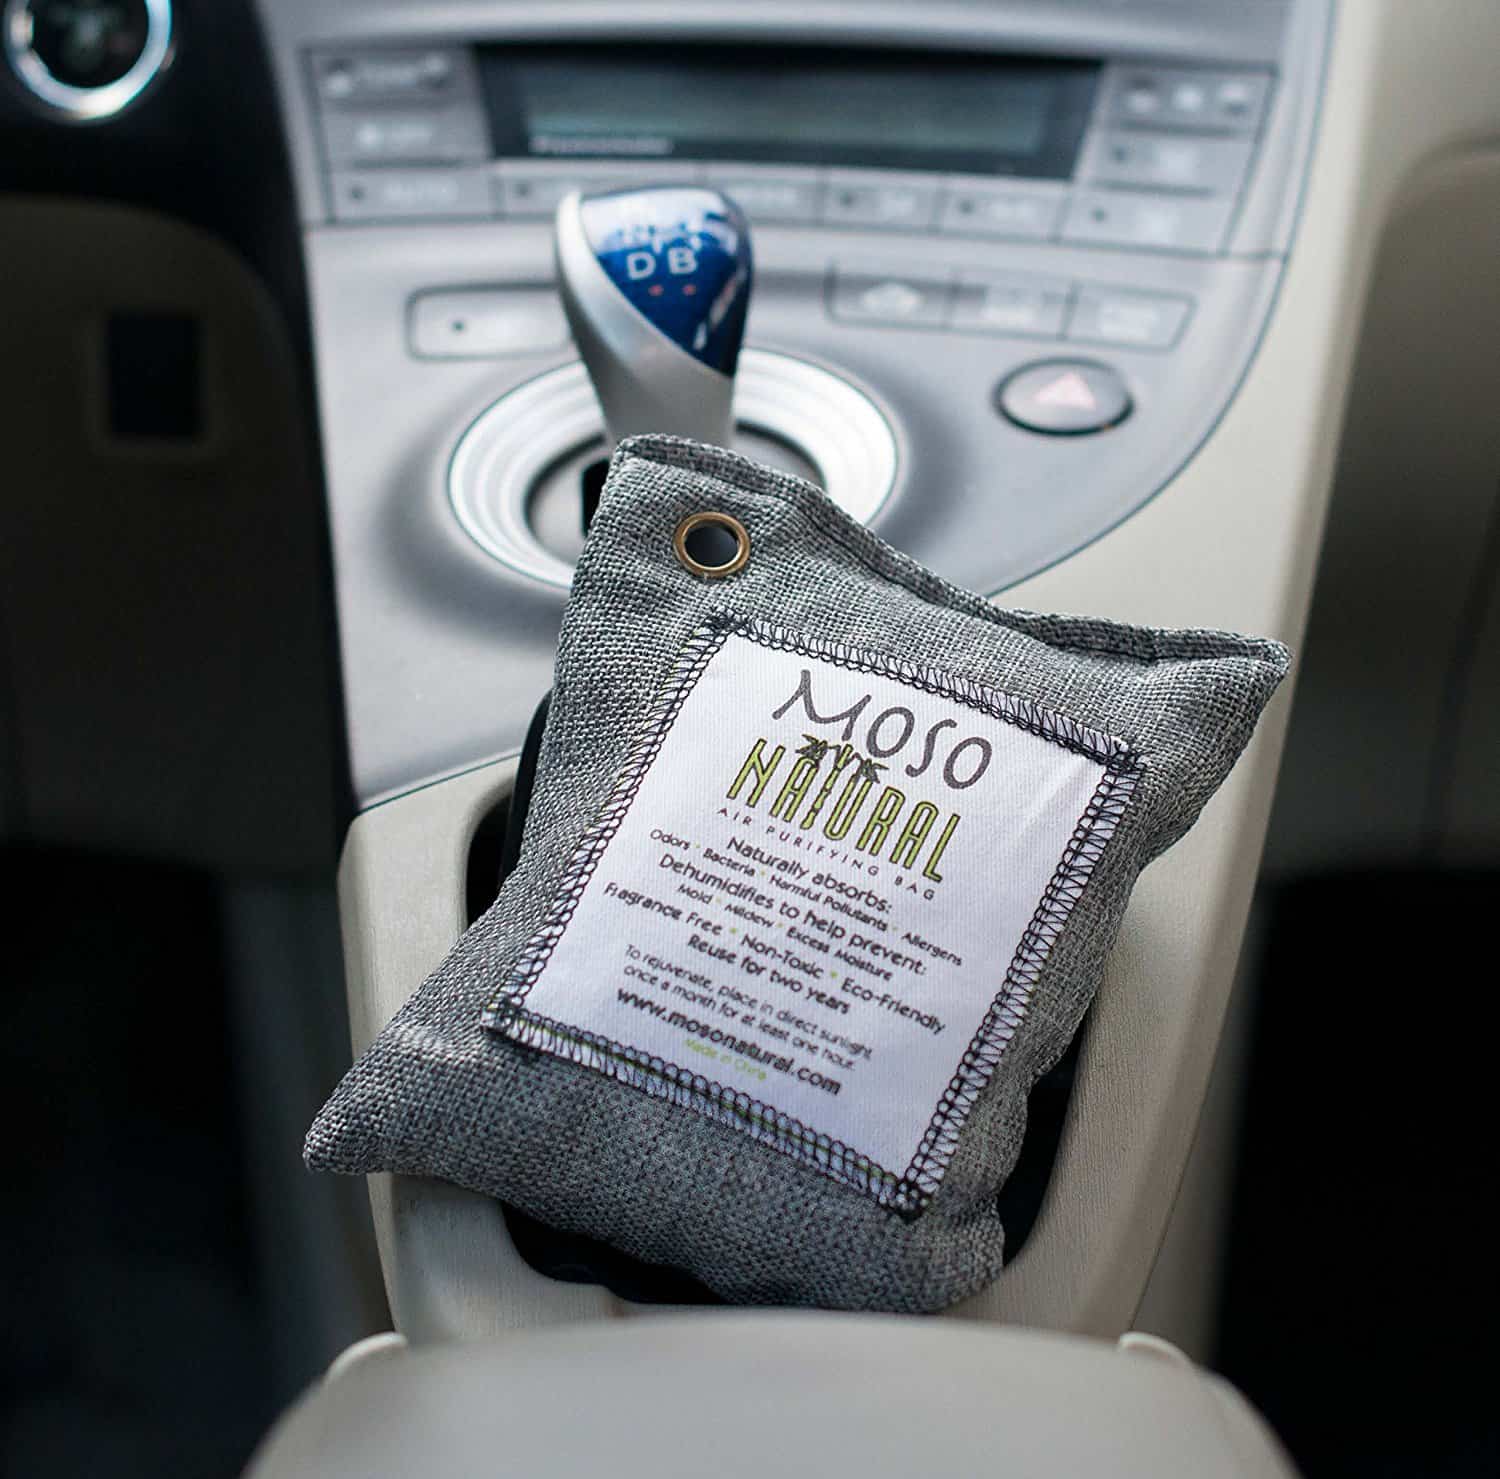 Best Car Air Freshener (Review and Buying Guide) in 2020